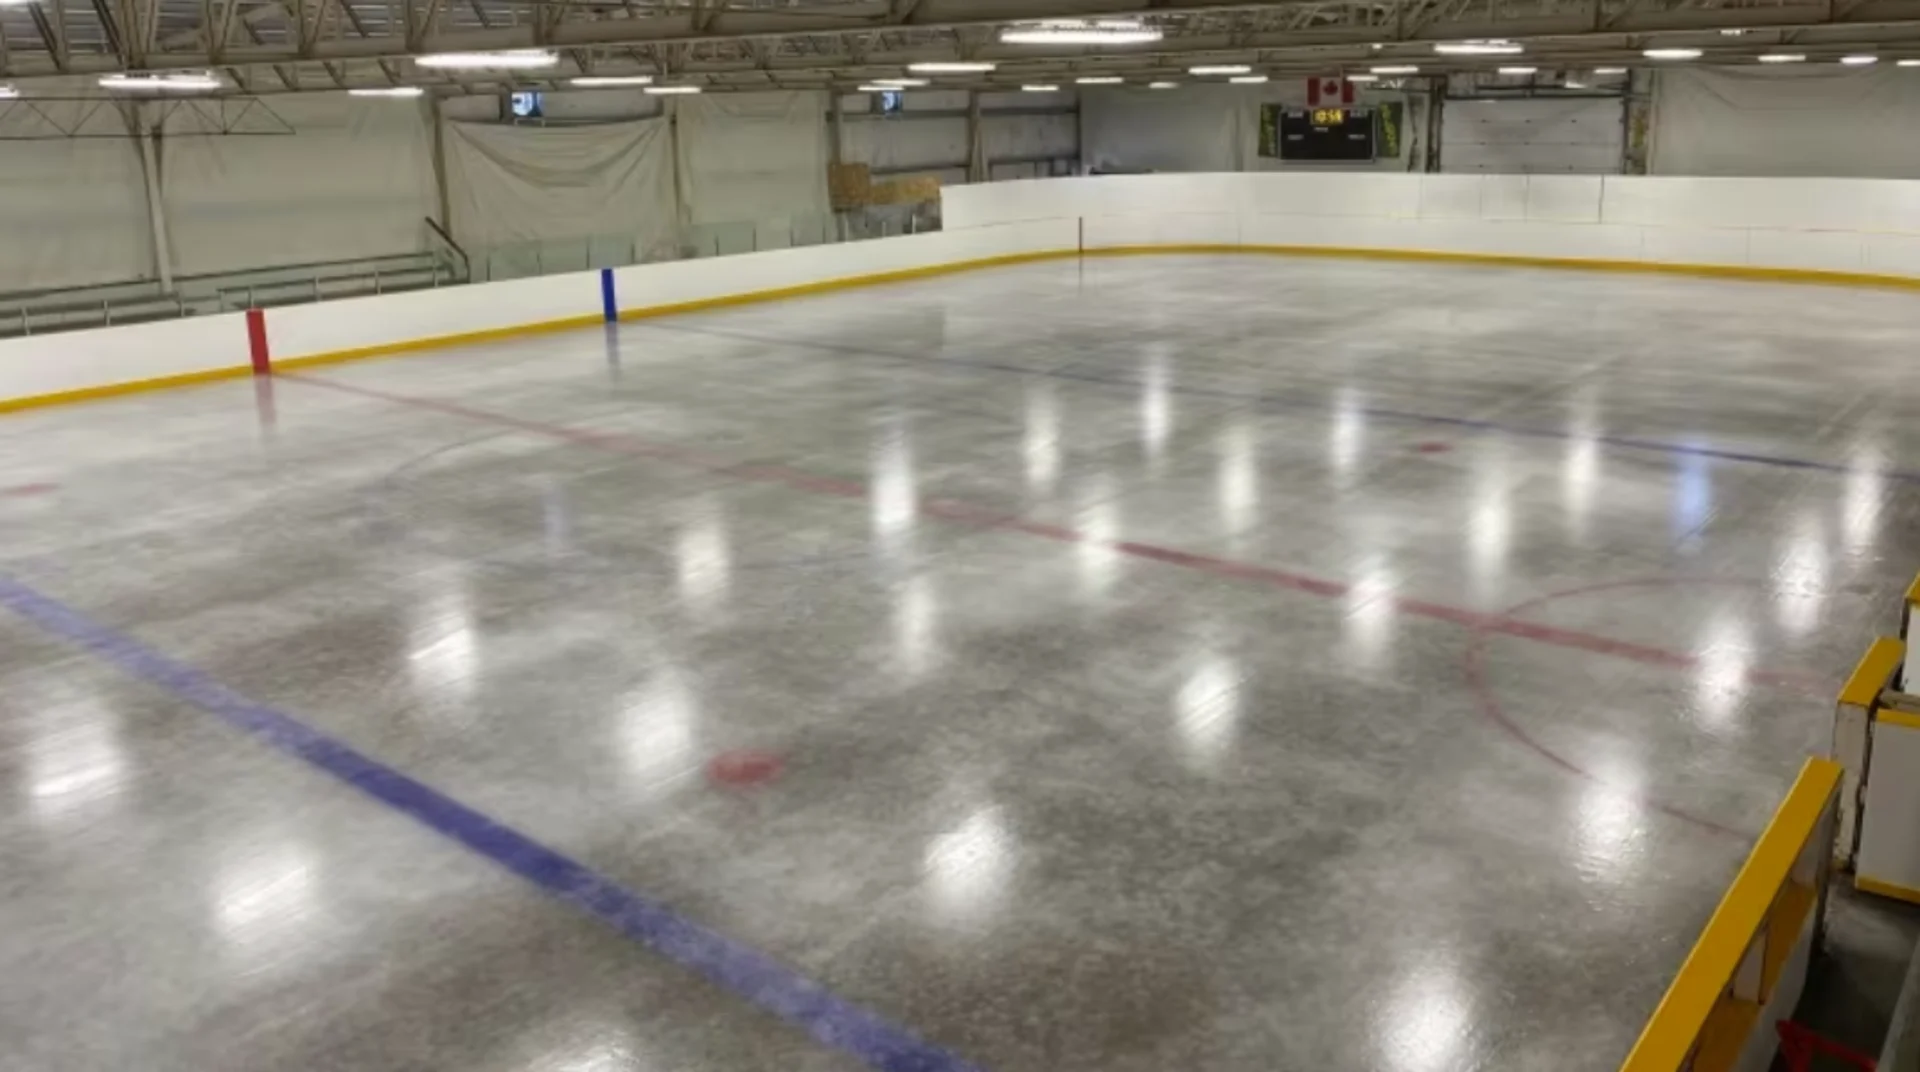 Sask. town struggles to solidify natural ice rink in warm winter season